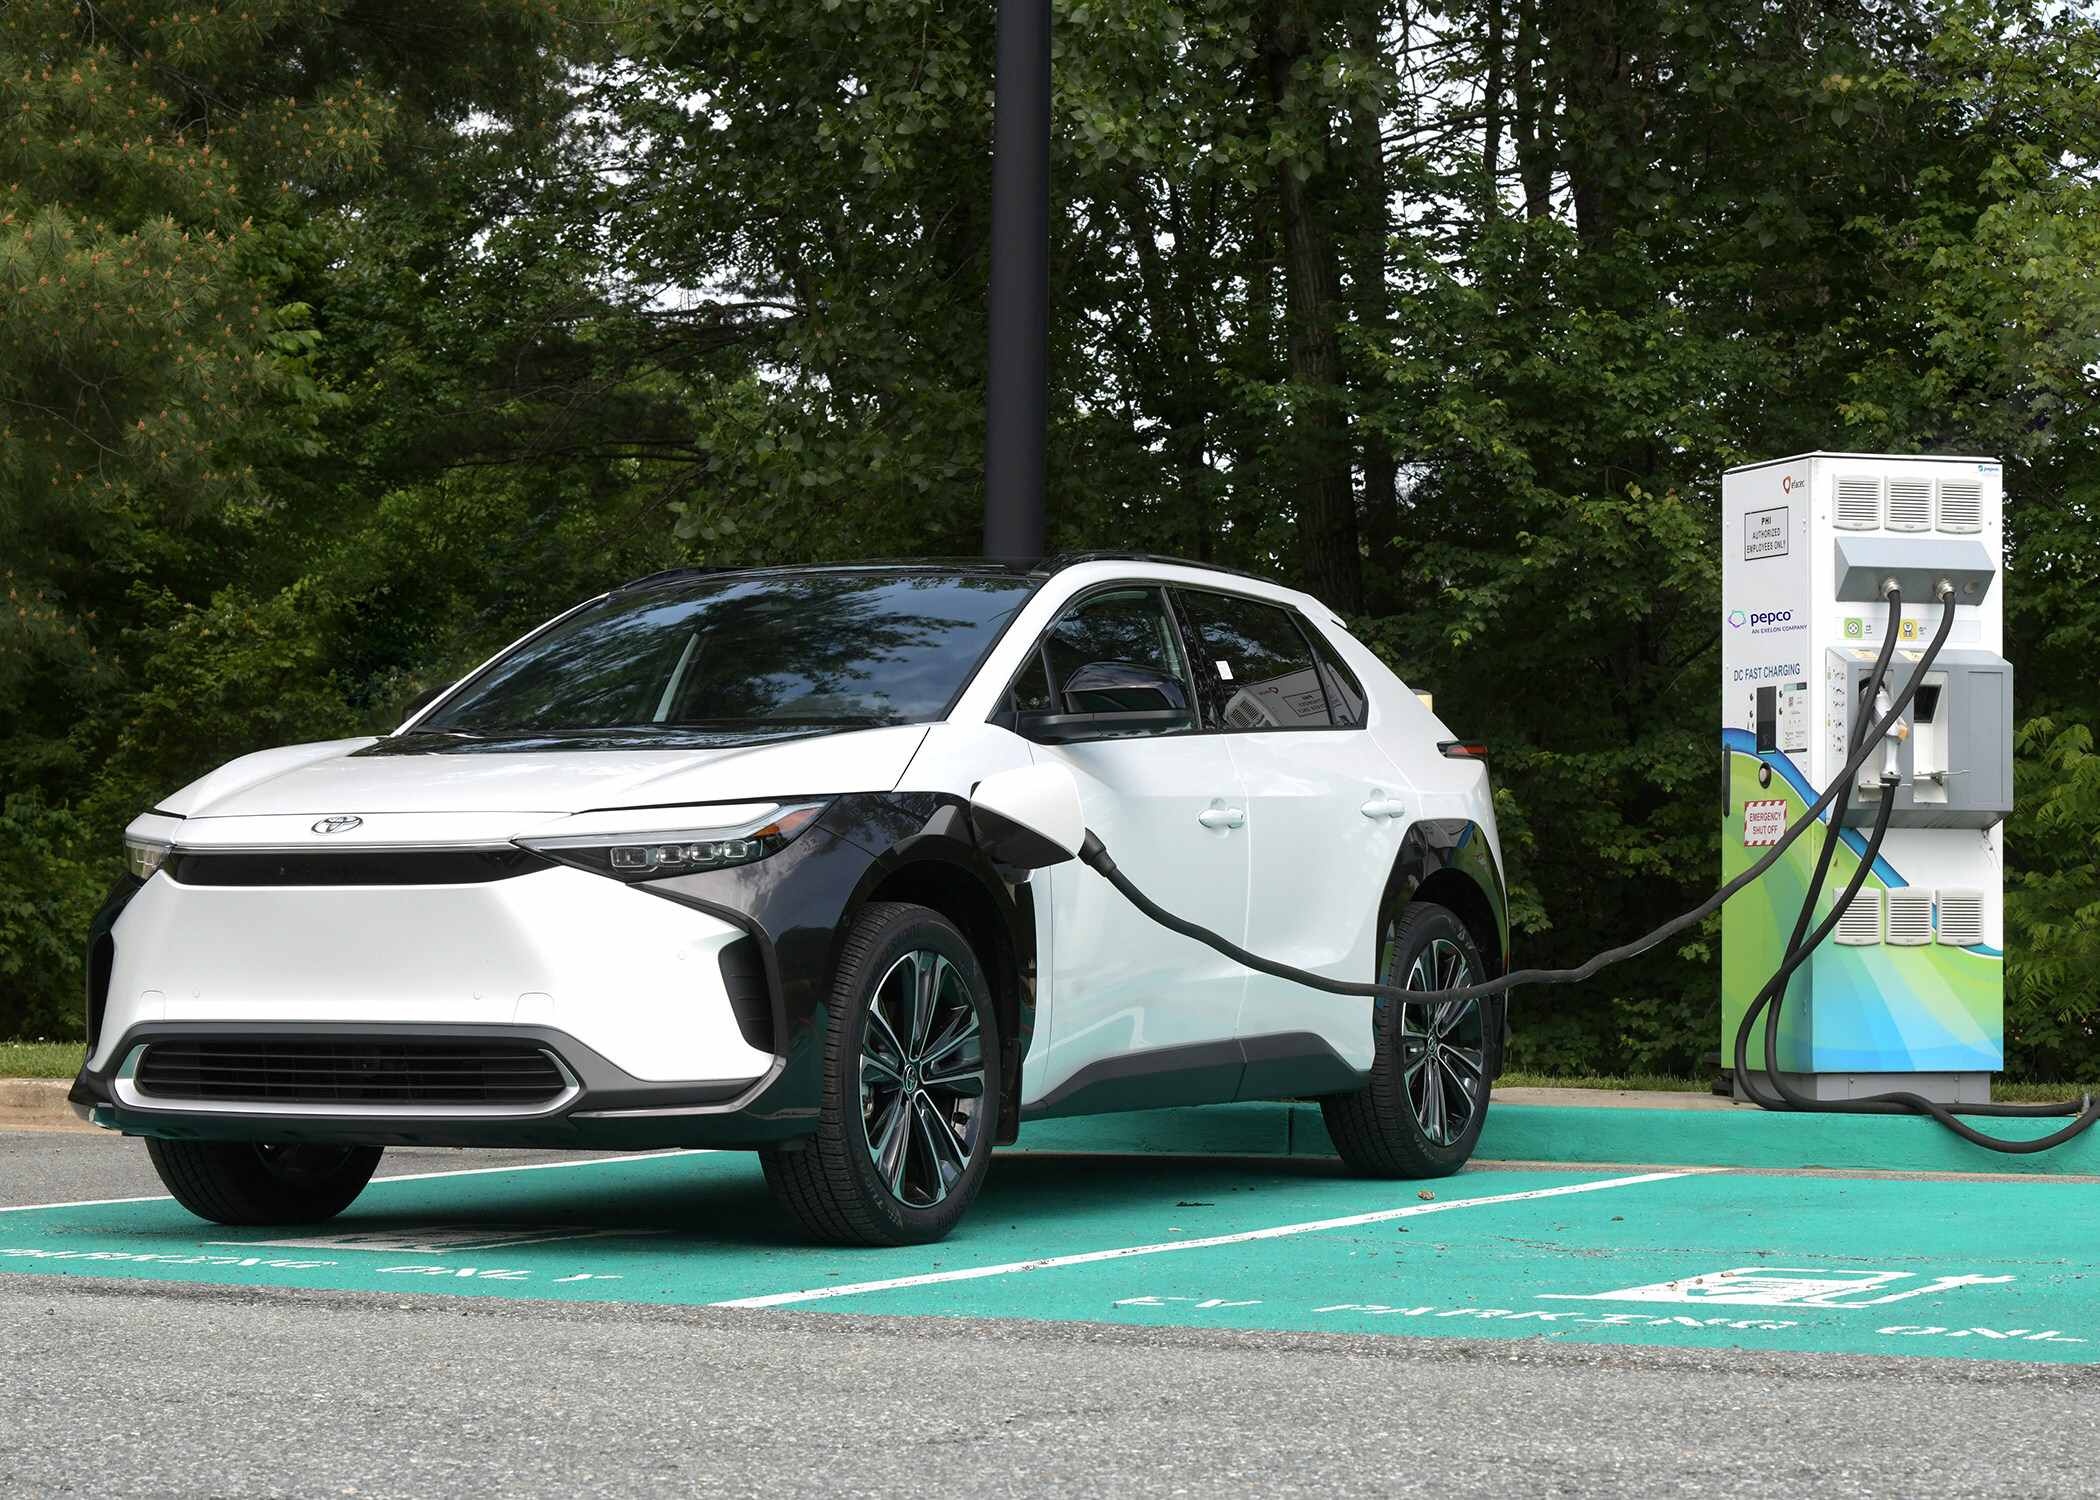 Toyota and Pepco have teamed up to research Vehicle-to-Grid technology in Maryland. Photo: Toyota Motor North America